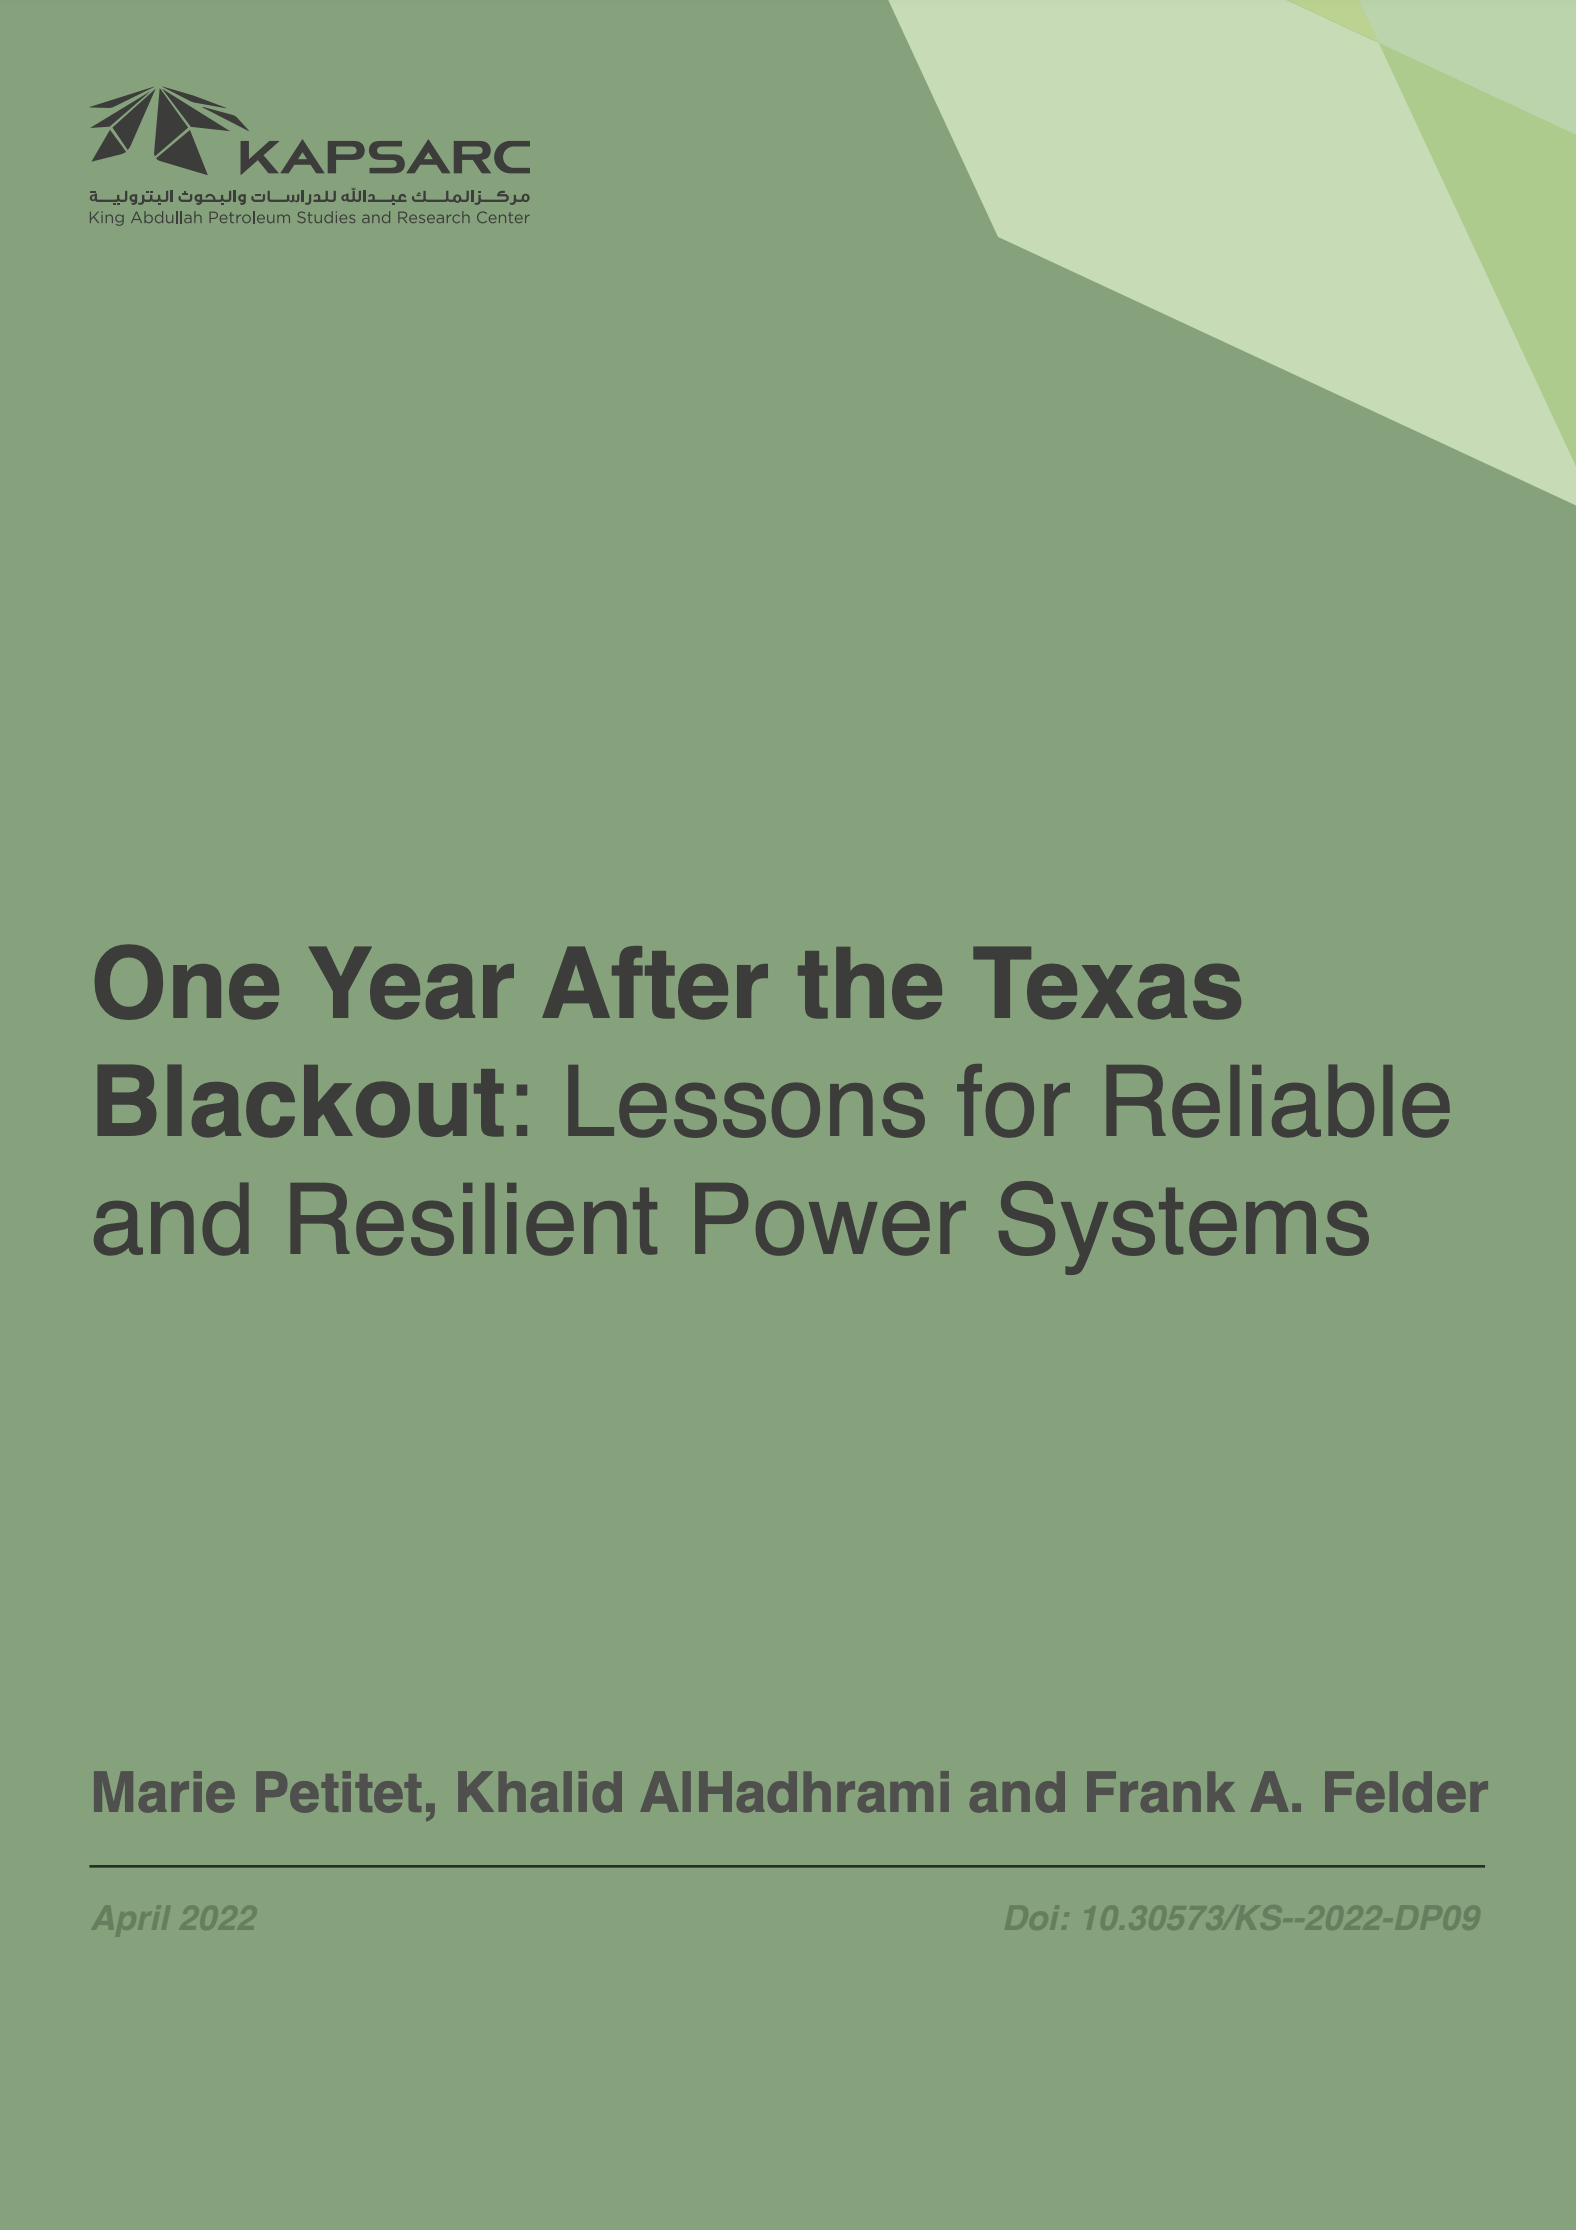 One Year After the Texas Blackout: Lessons for Reliable and Resilient Power Systems